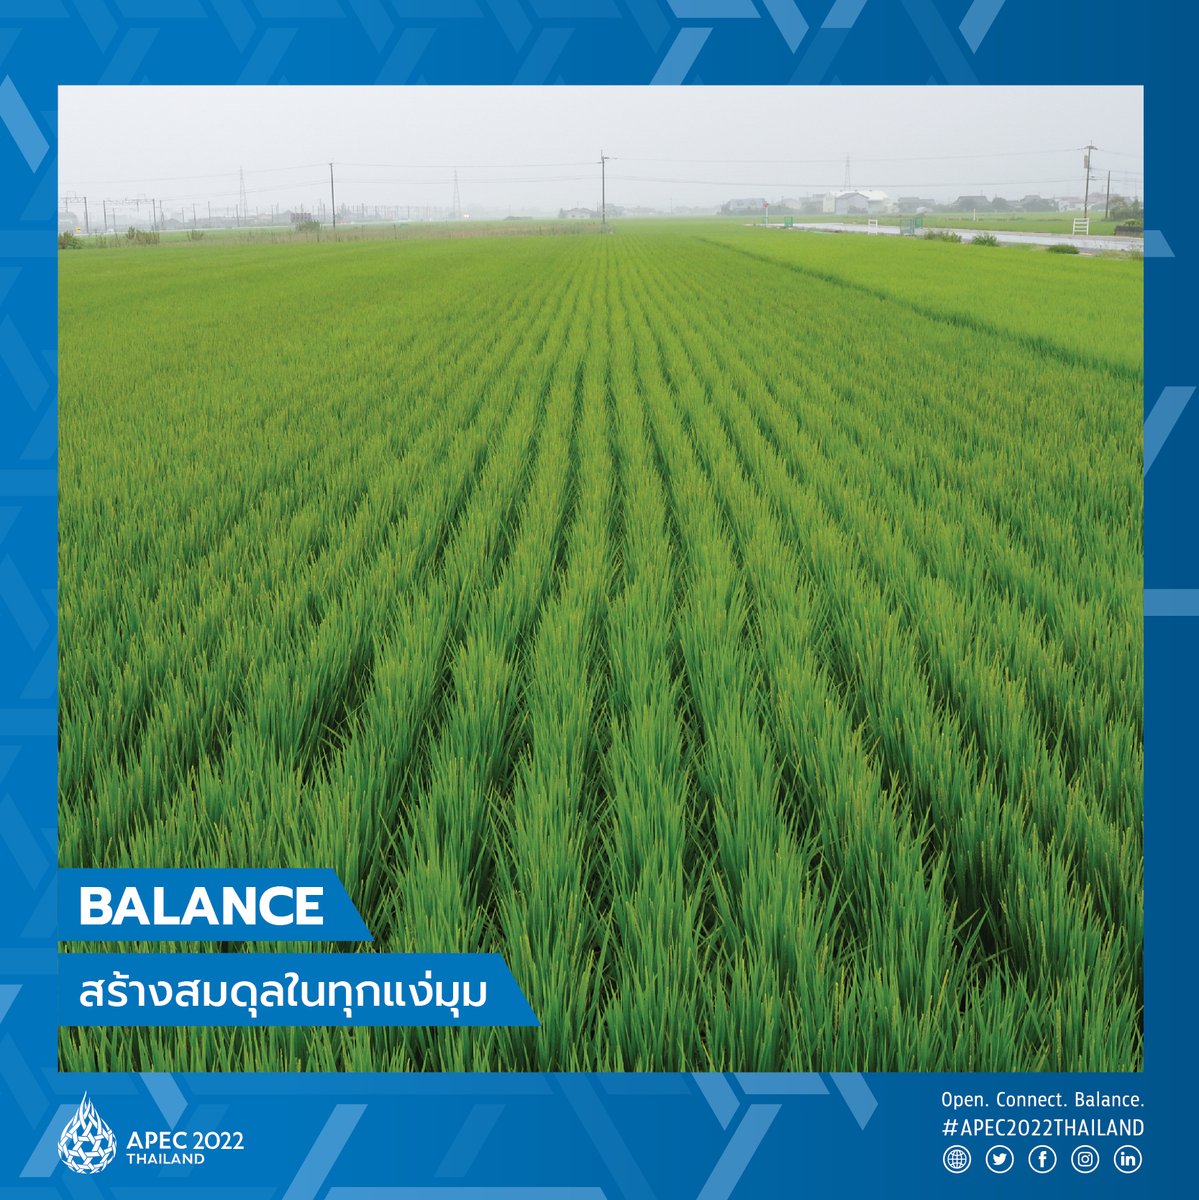 Balance in all aspects. The BCG Economy model will serve as the main vehicle to our solution. This includes a declaration outlining common goals with clear conviction in supporting the responsible business practices while putting an emphasis on sustainability.